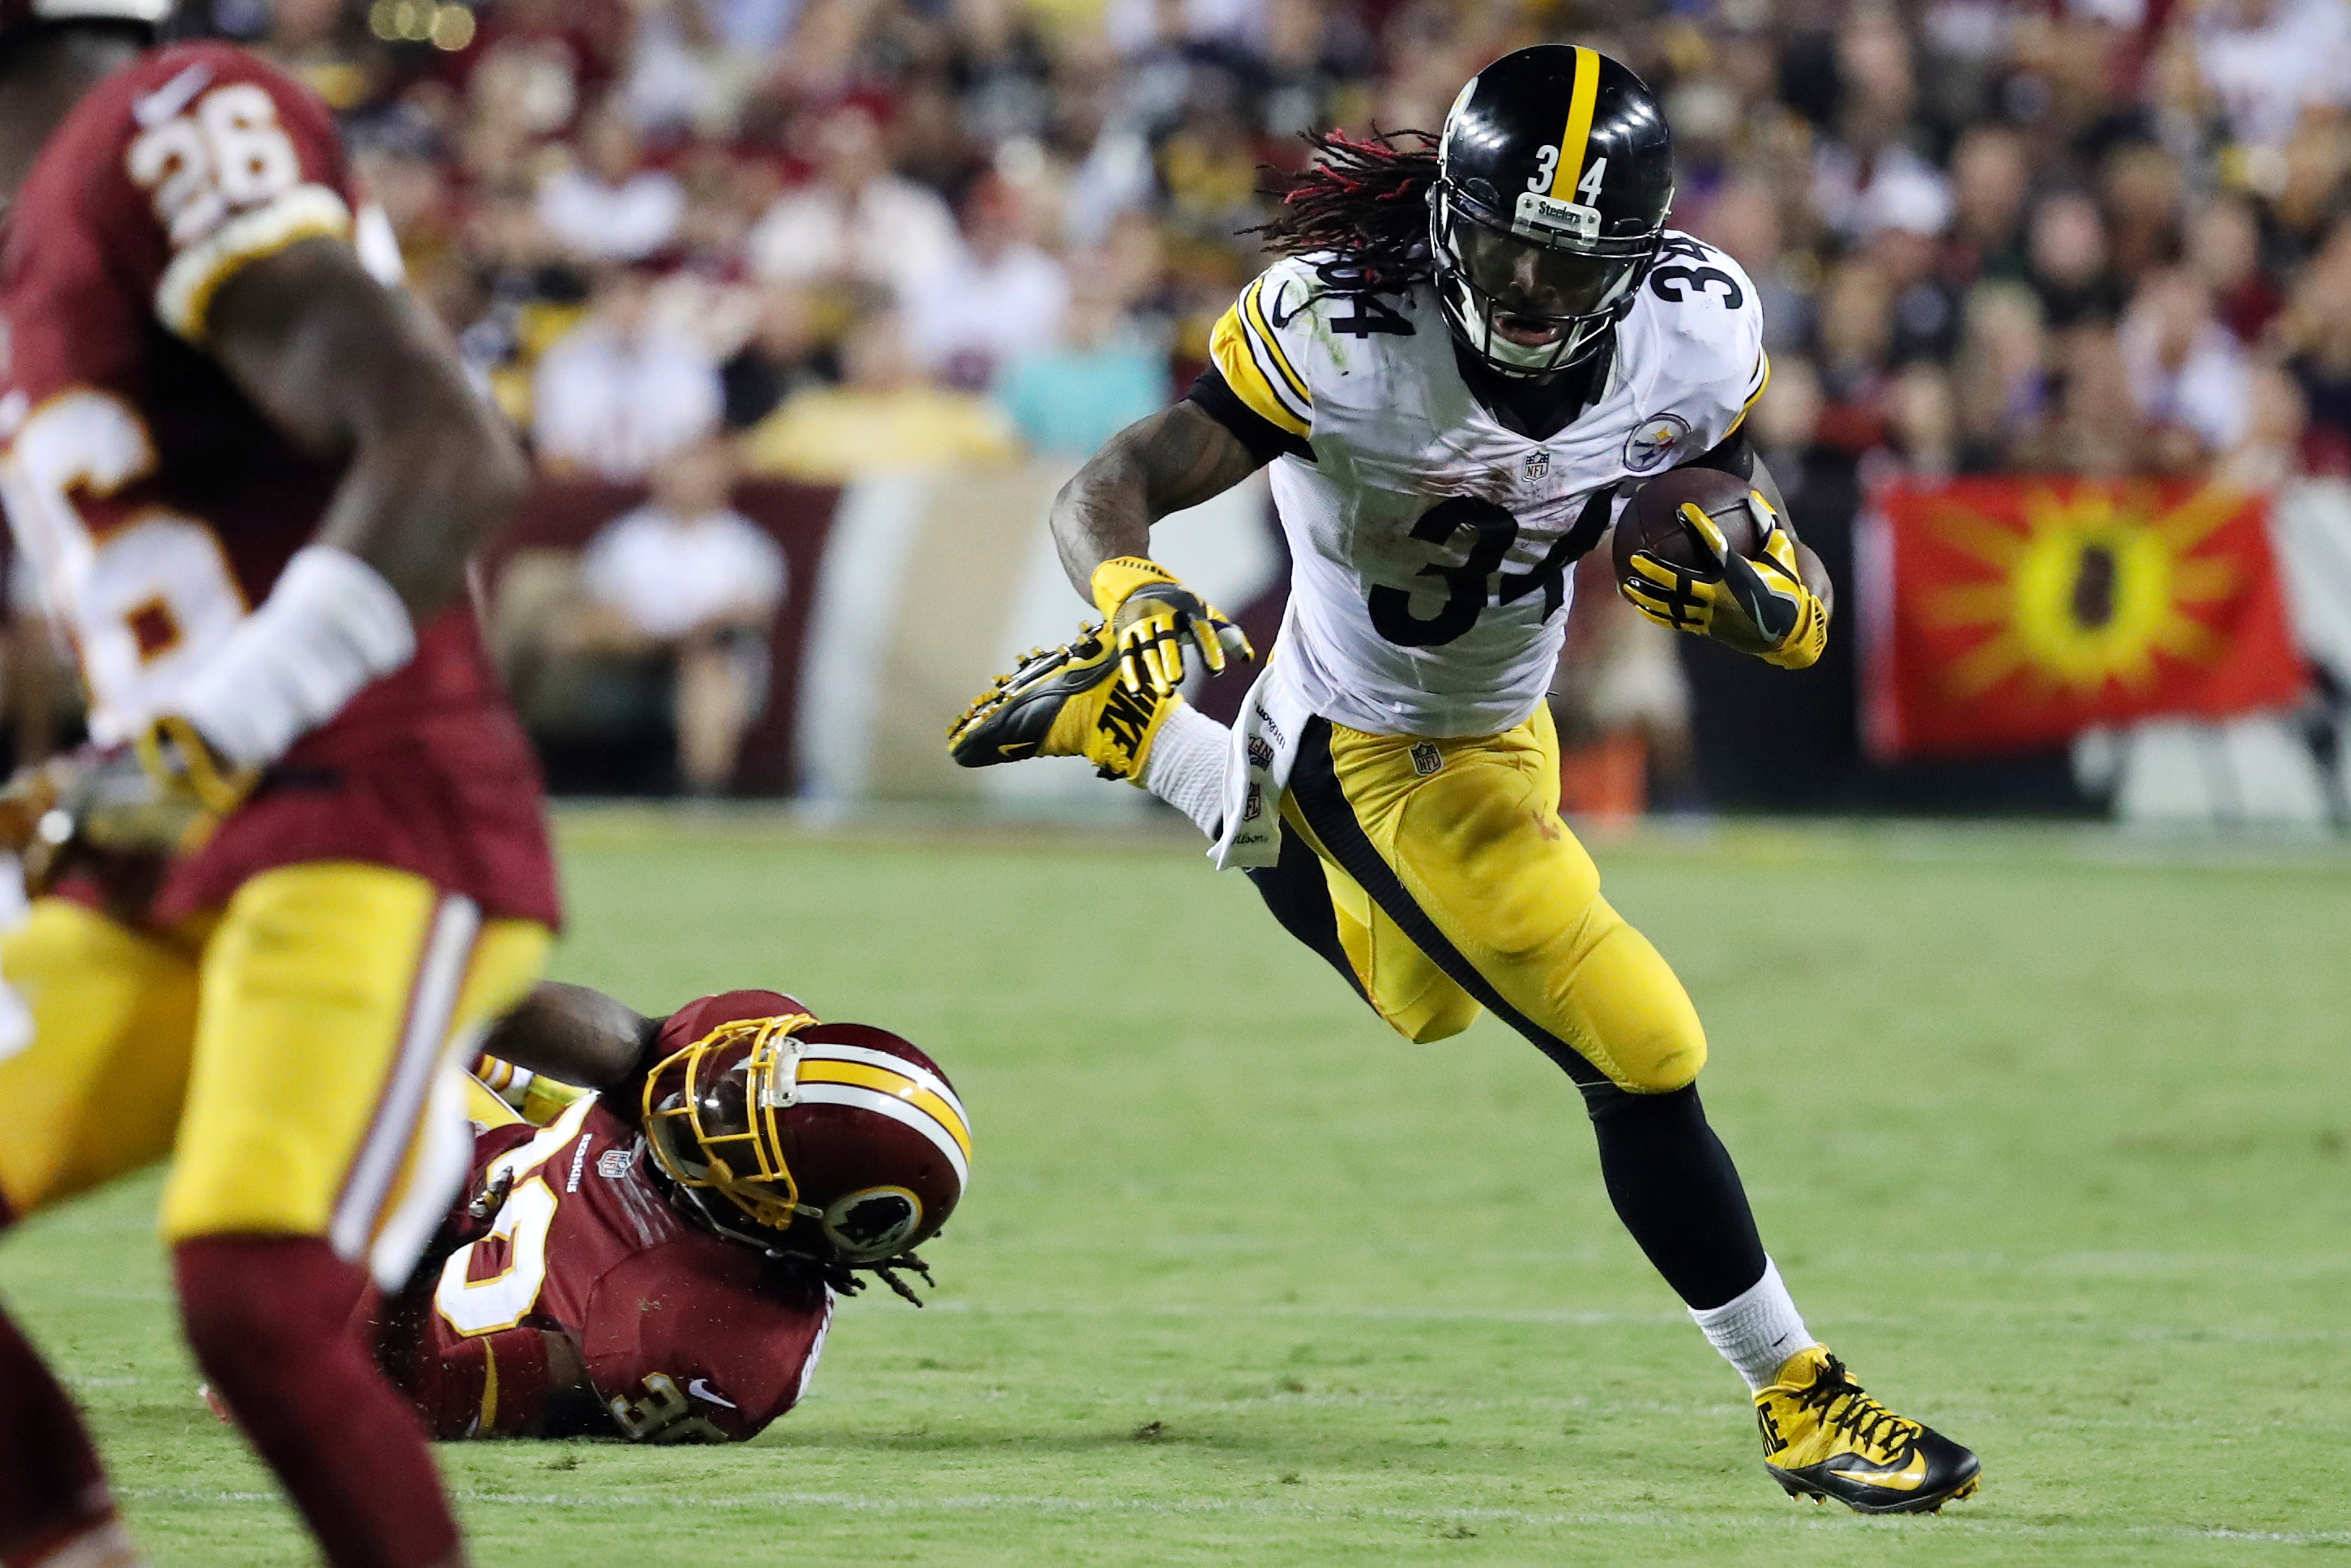 DeAngelo Williams will continue to be an RB1 in fantasy until Le'Veon Bell returns in Week 4